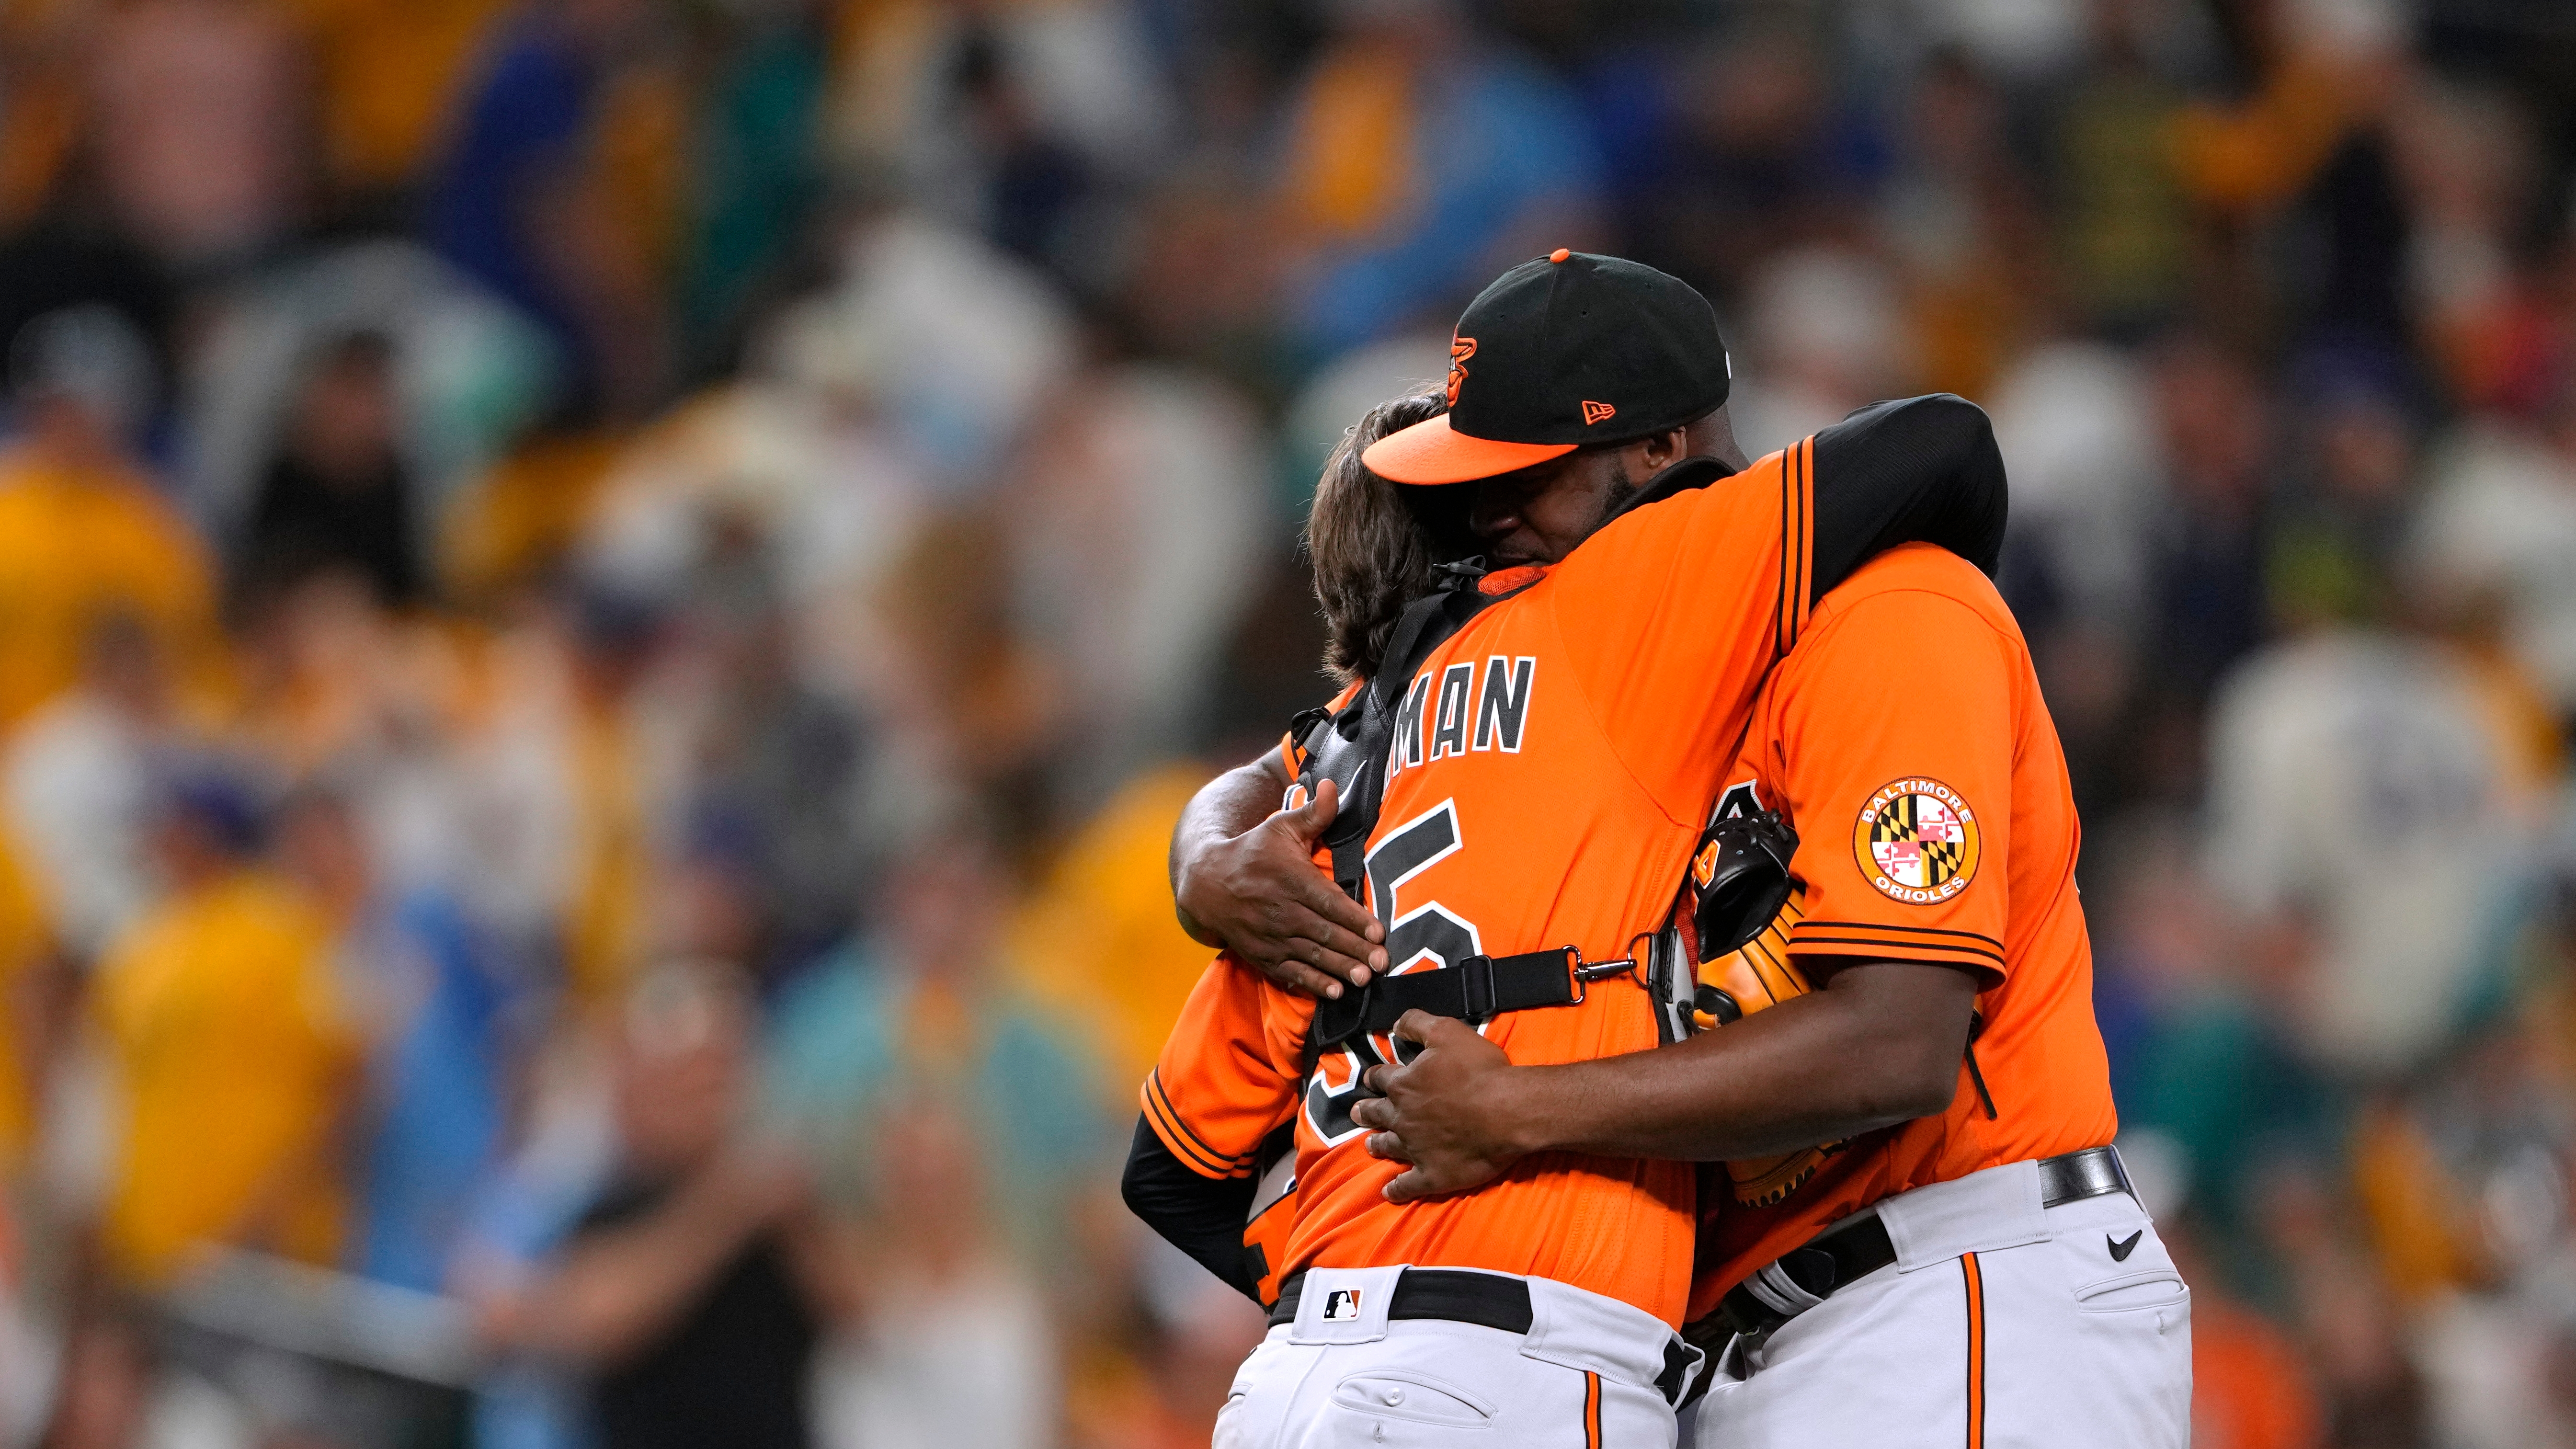 Orioles break through in 10th to beat red-hot Mariners, 1-0, as